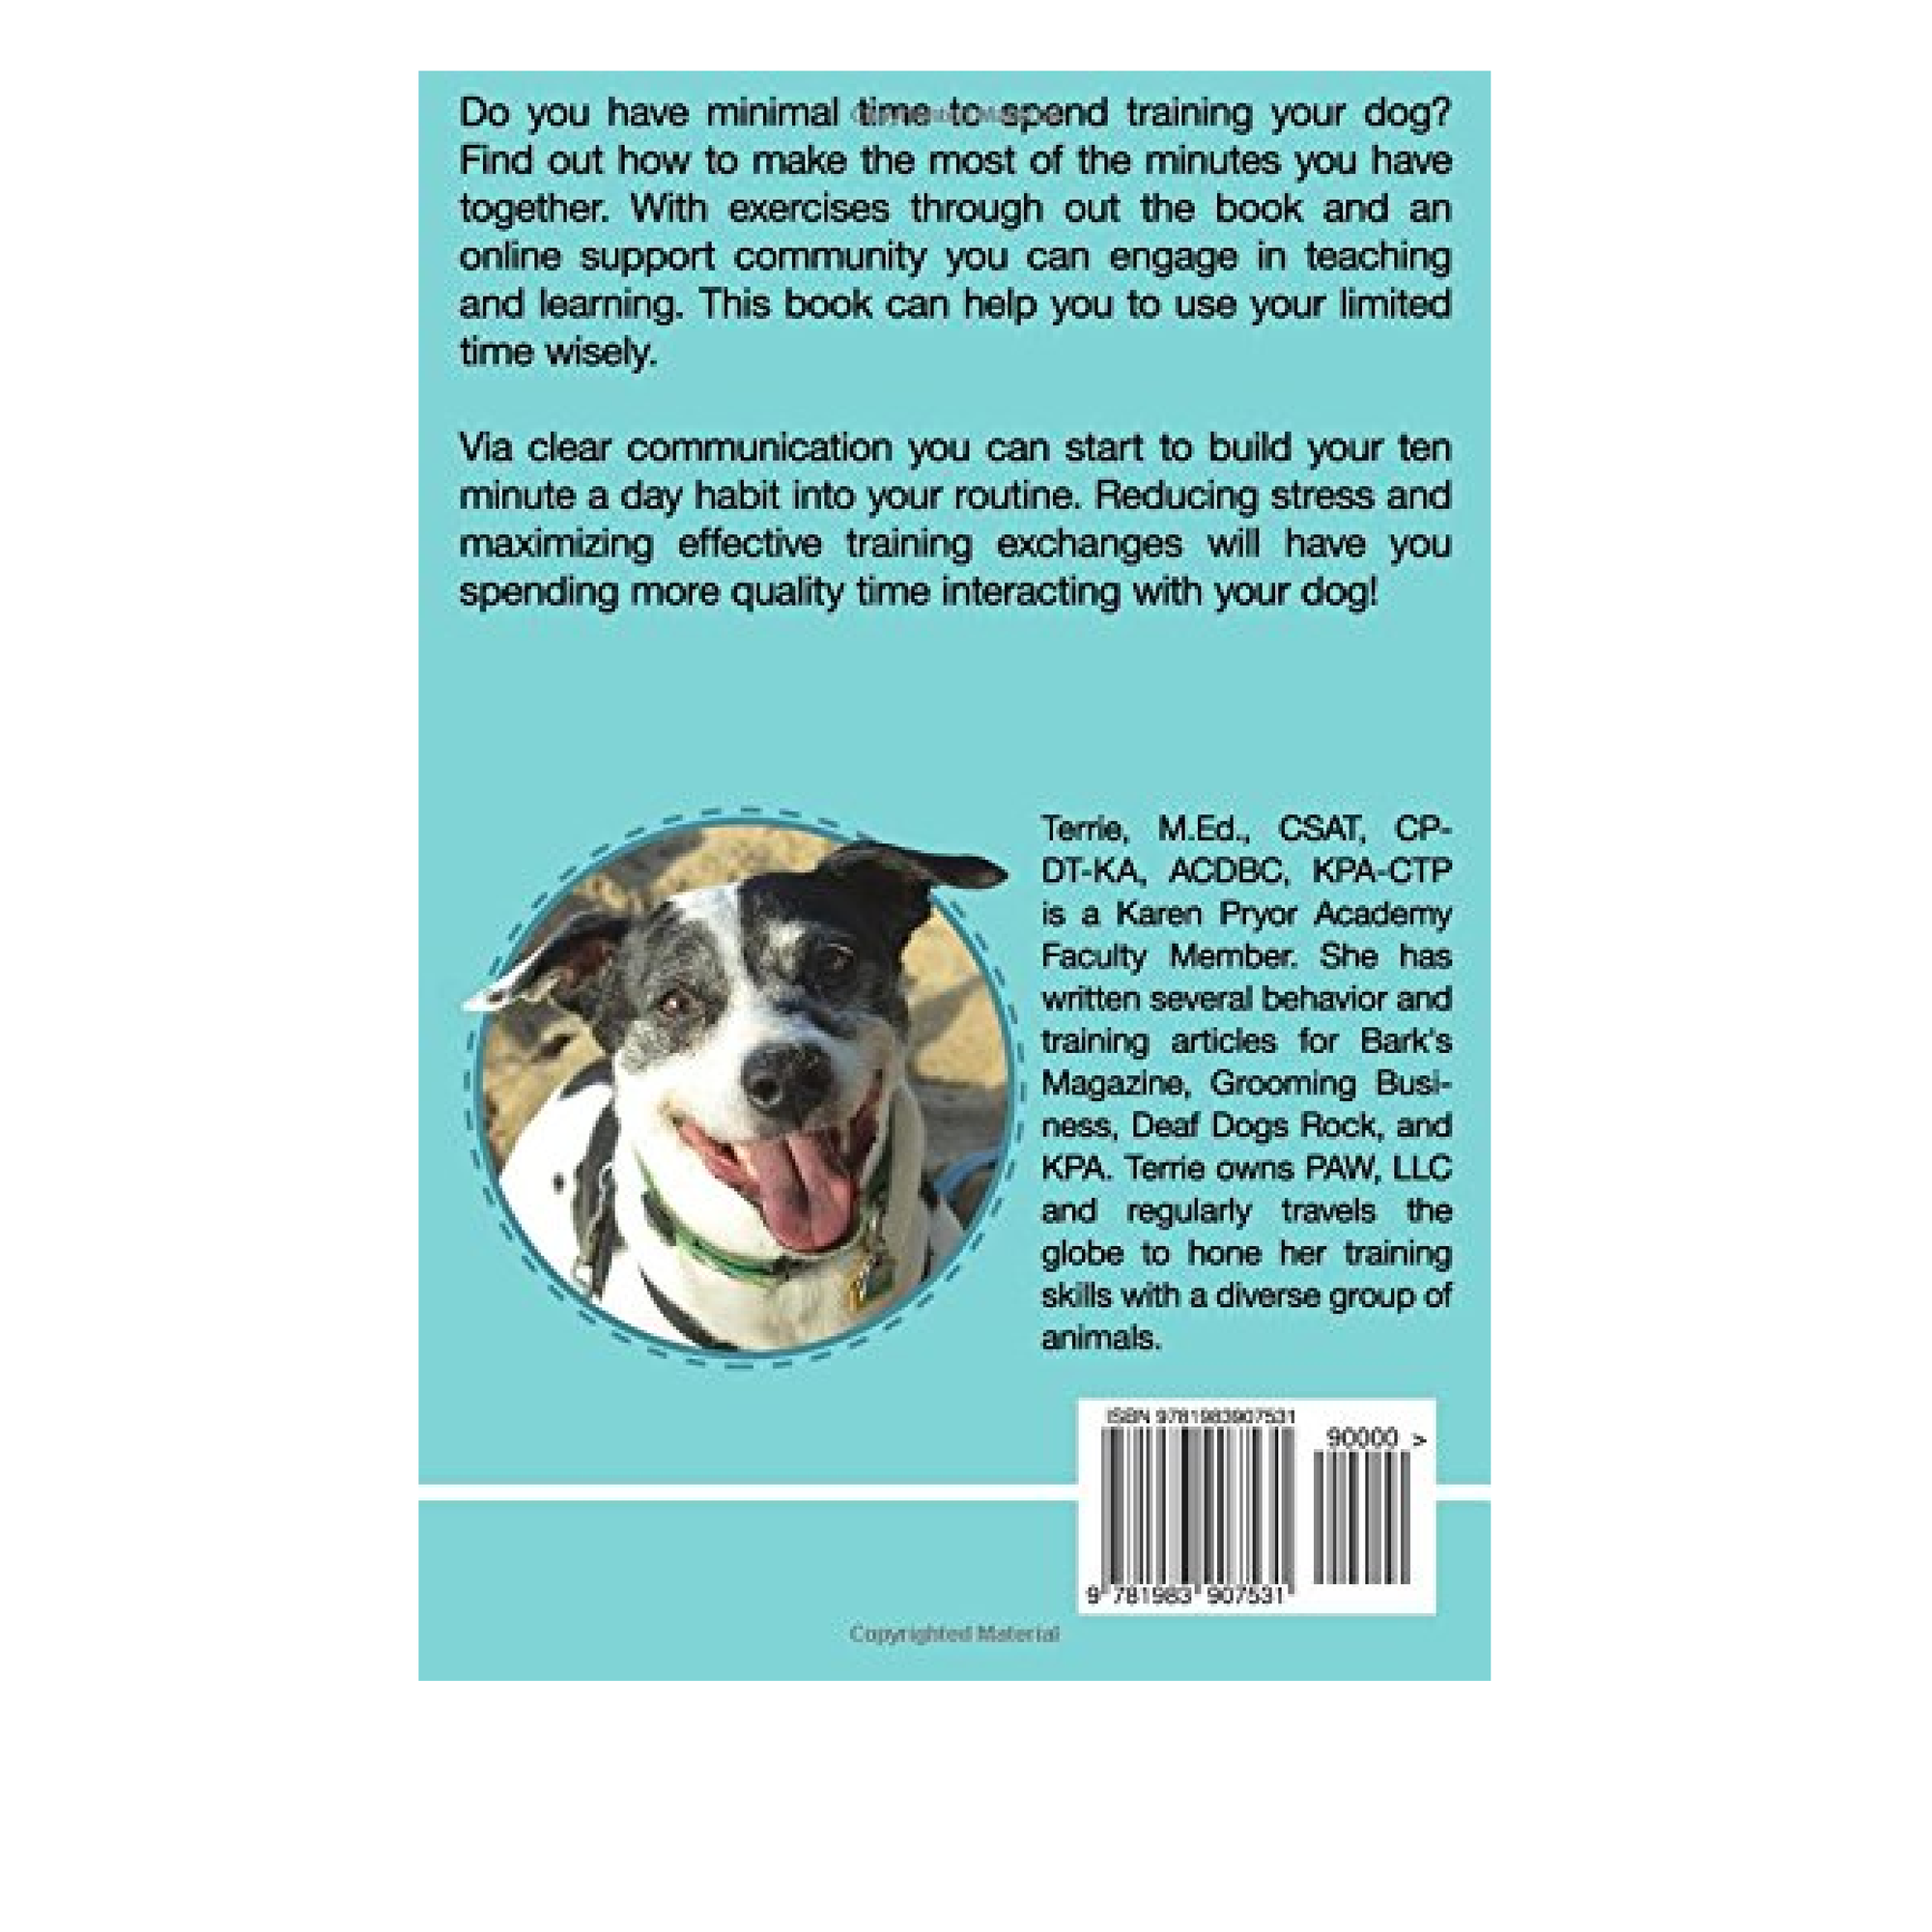 Your 10 Minute a Day Dog: A Training Guide to Using Your Time Wisely to Communicate Effectively by Terrie Hayward